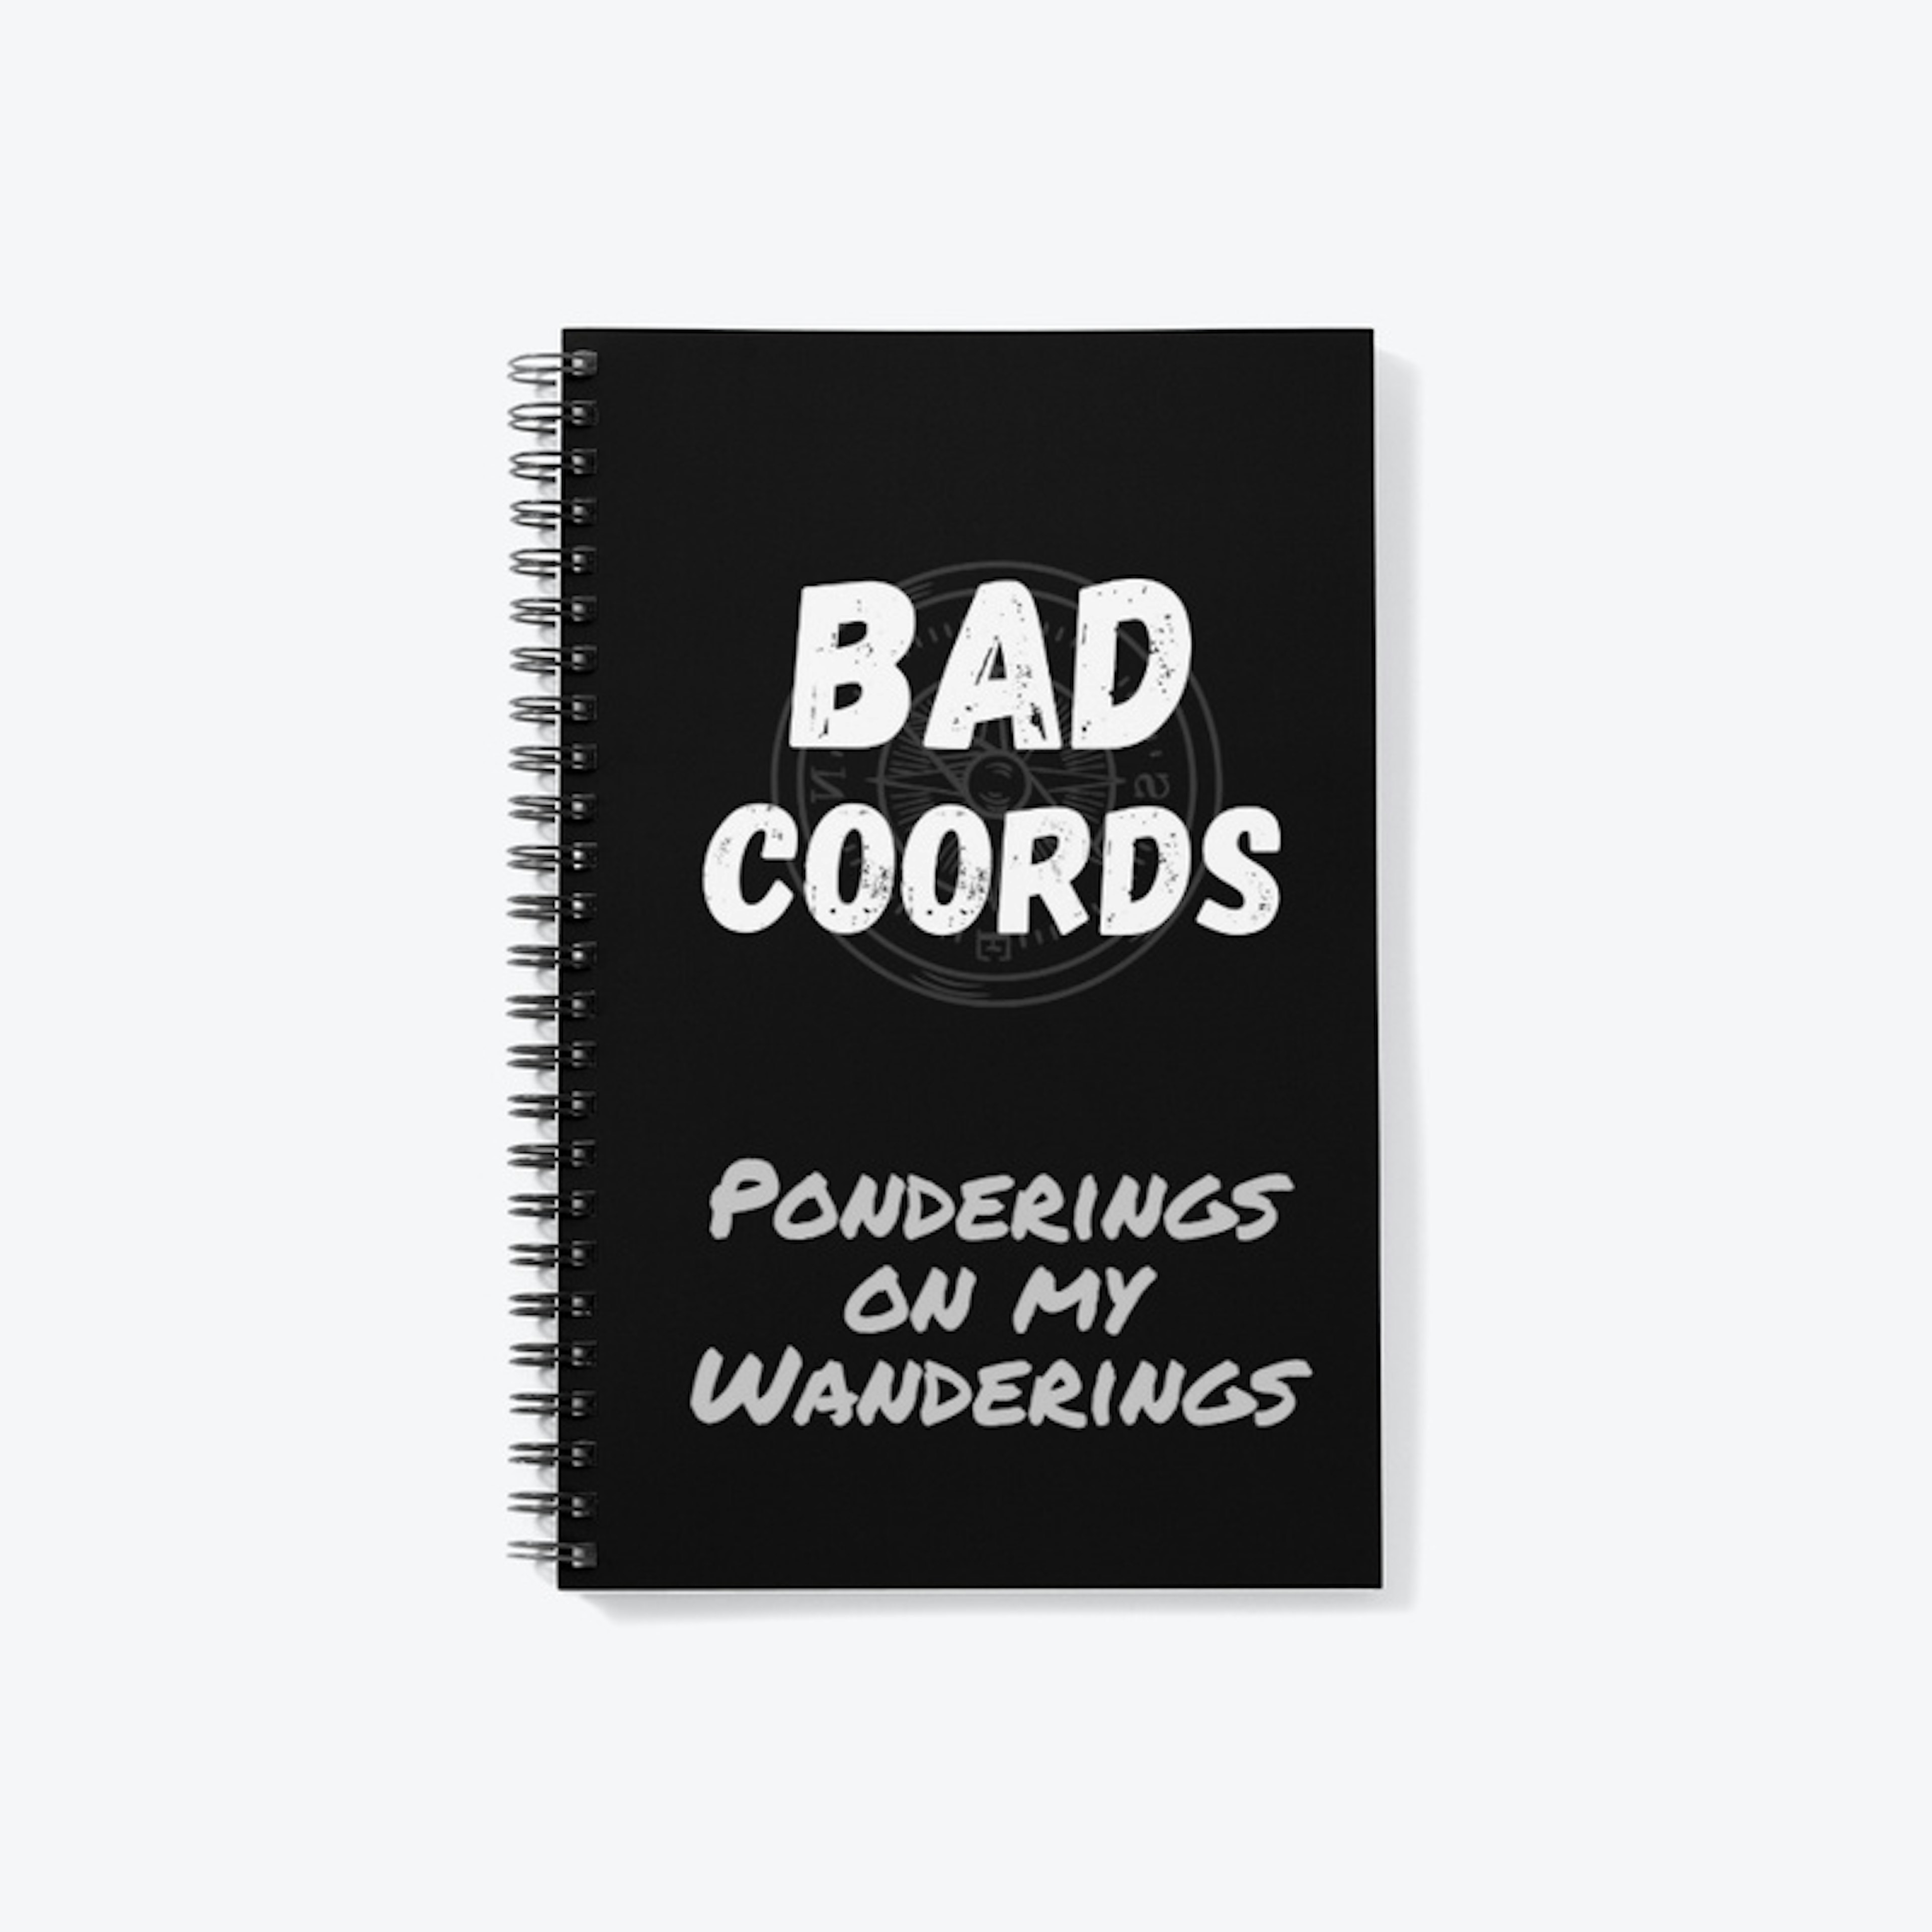 Bad Coords - You Got This!